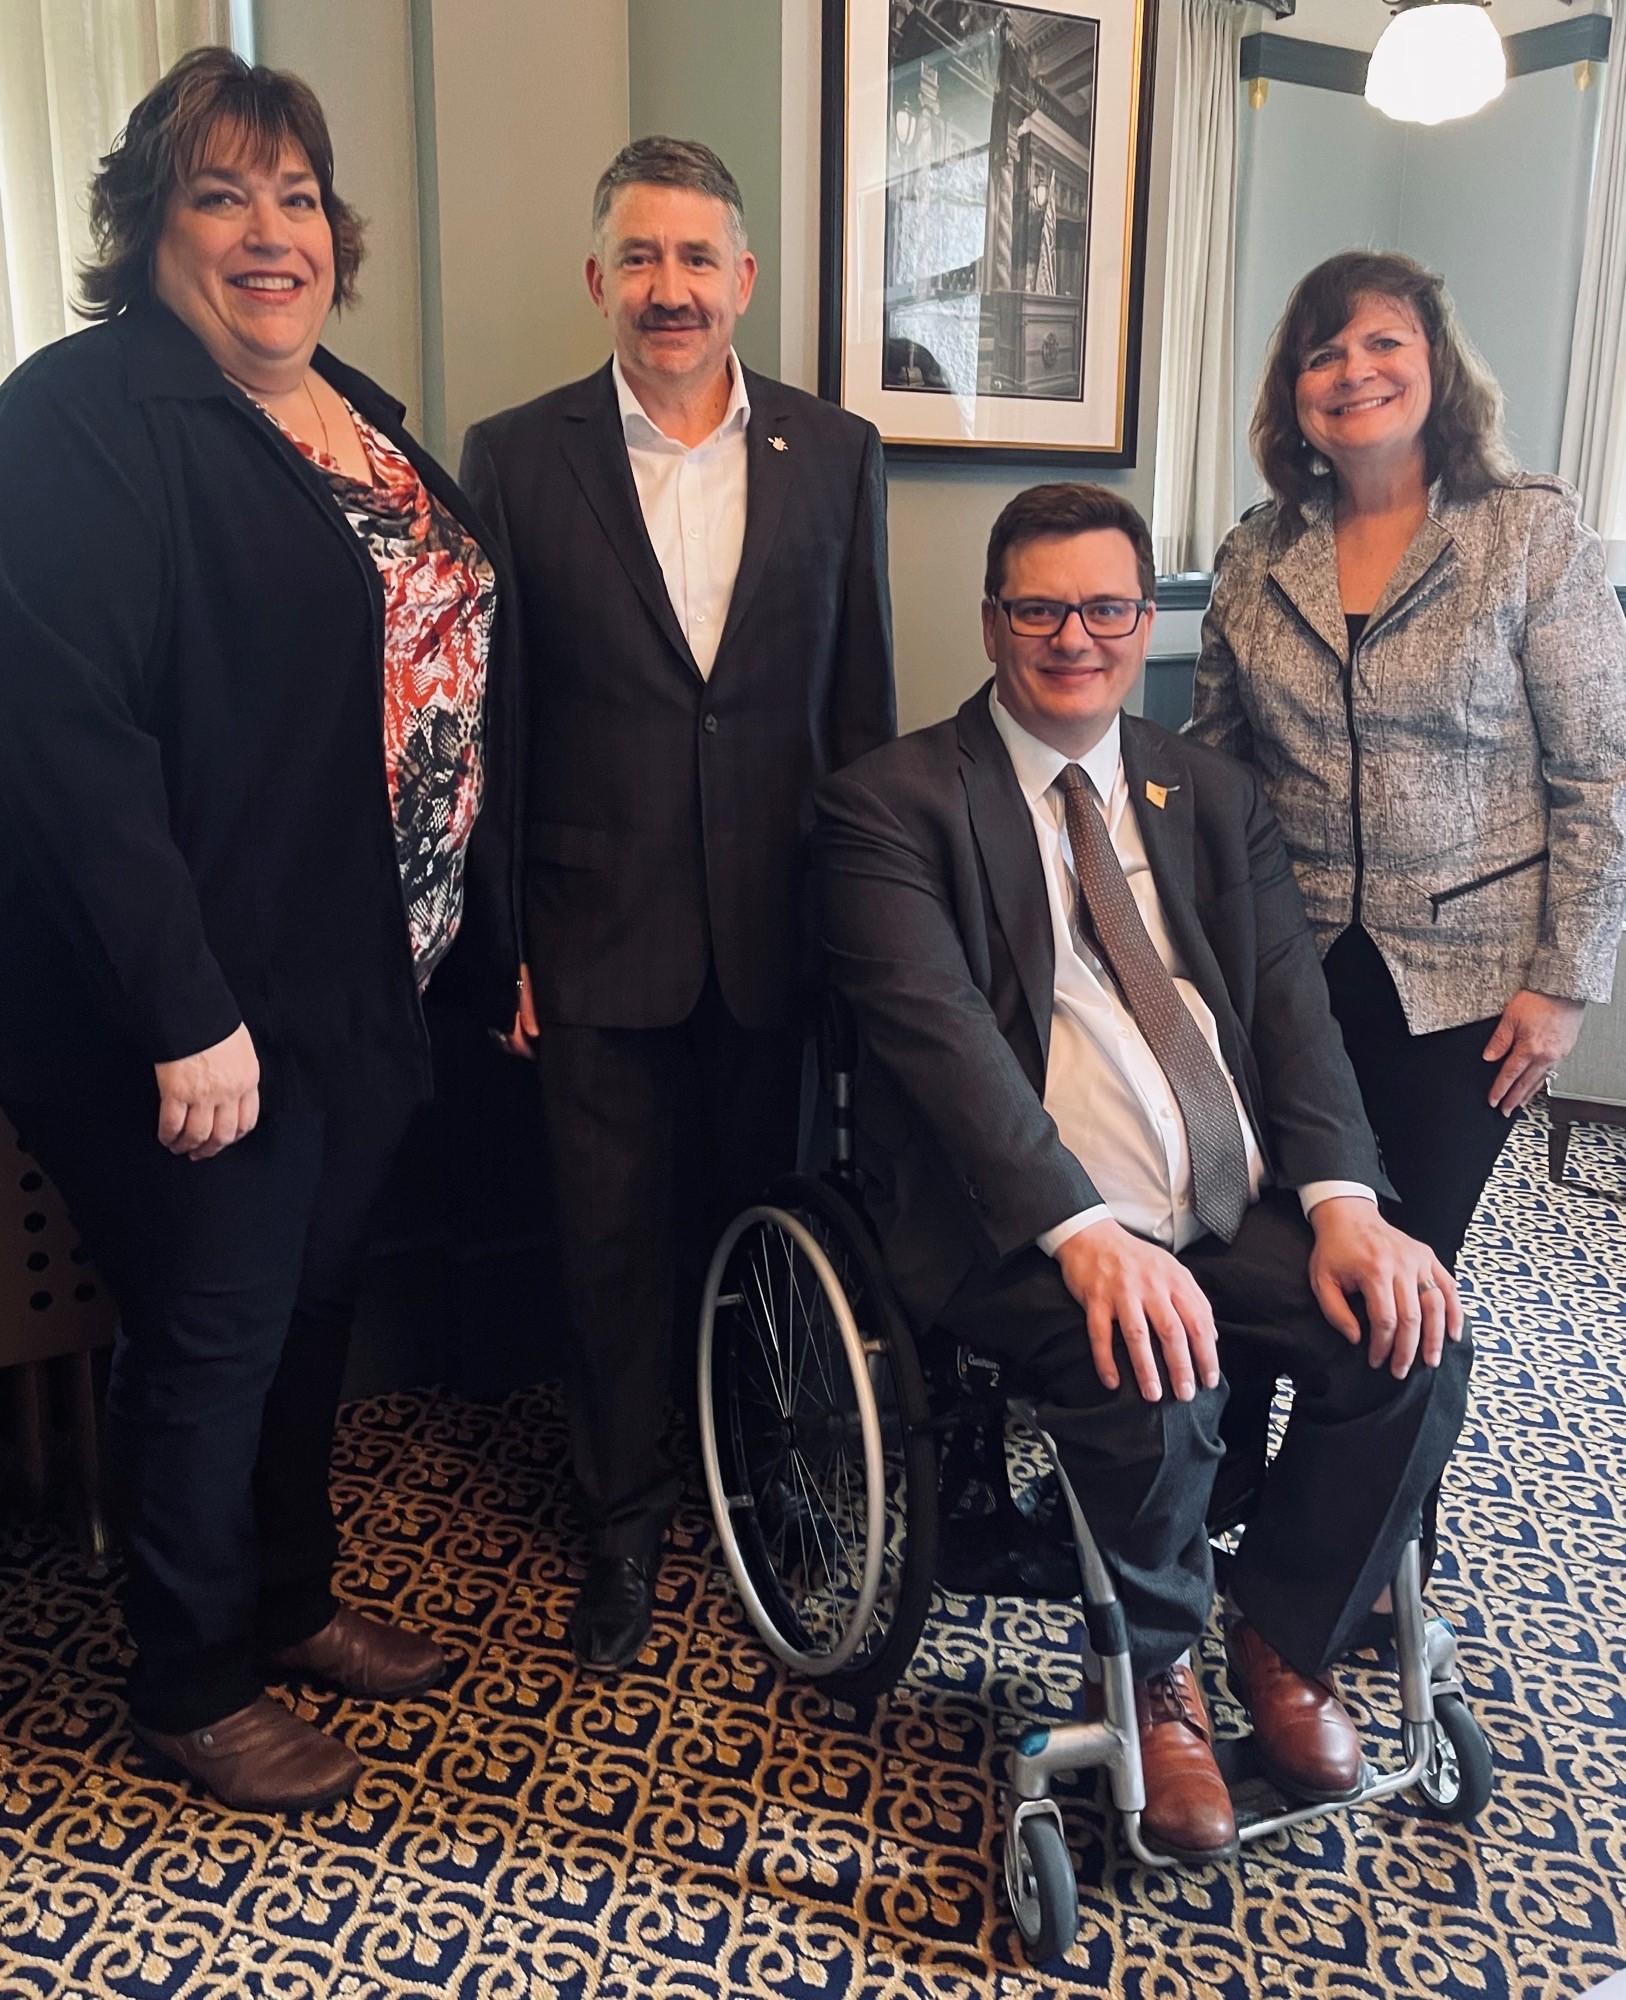 Sherry Grabowski, Vice President of CNIB Deafblind Community services poses with Dan Coulter, Nicholas Simons, and Theresa Tancock